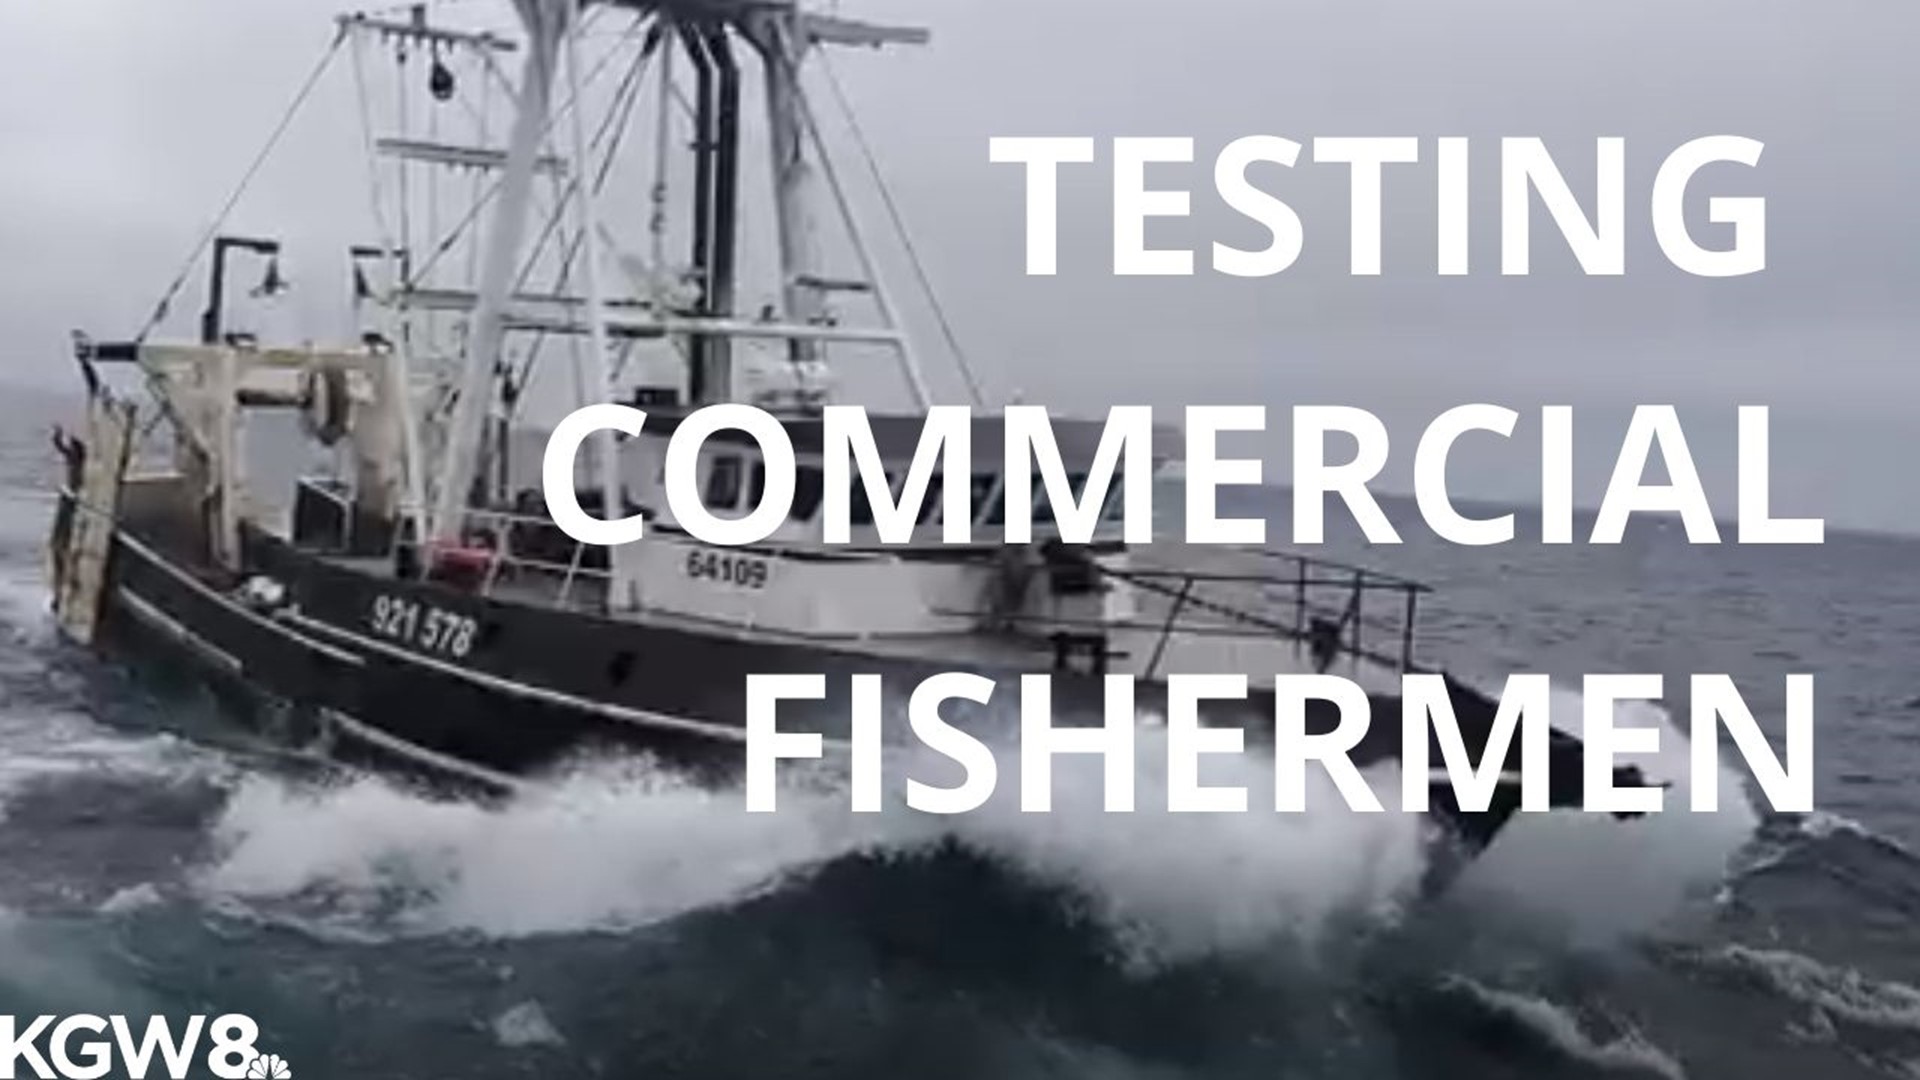 Before leaving Newport for fishing grounds off the coast, dozens of trawlers were tested for COVID-19.